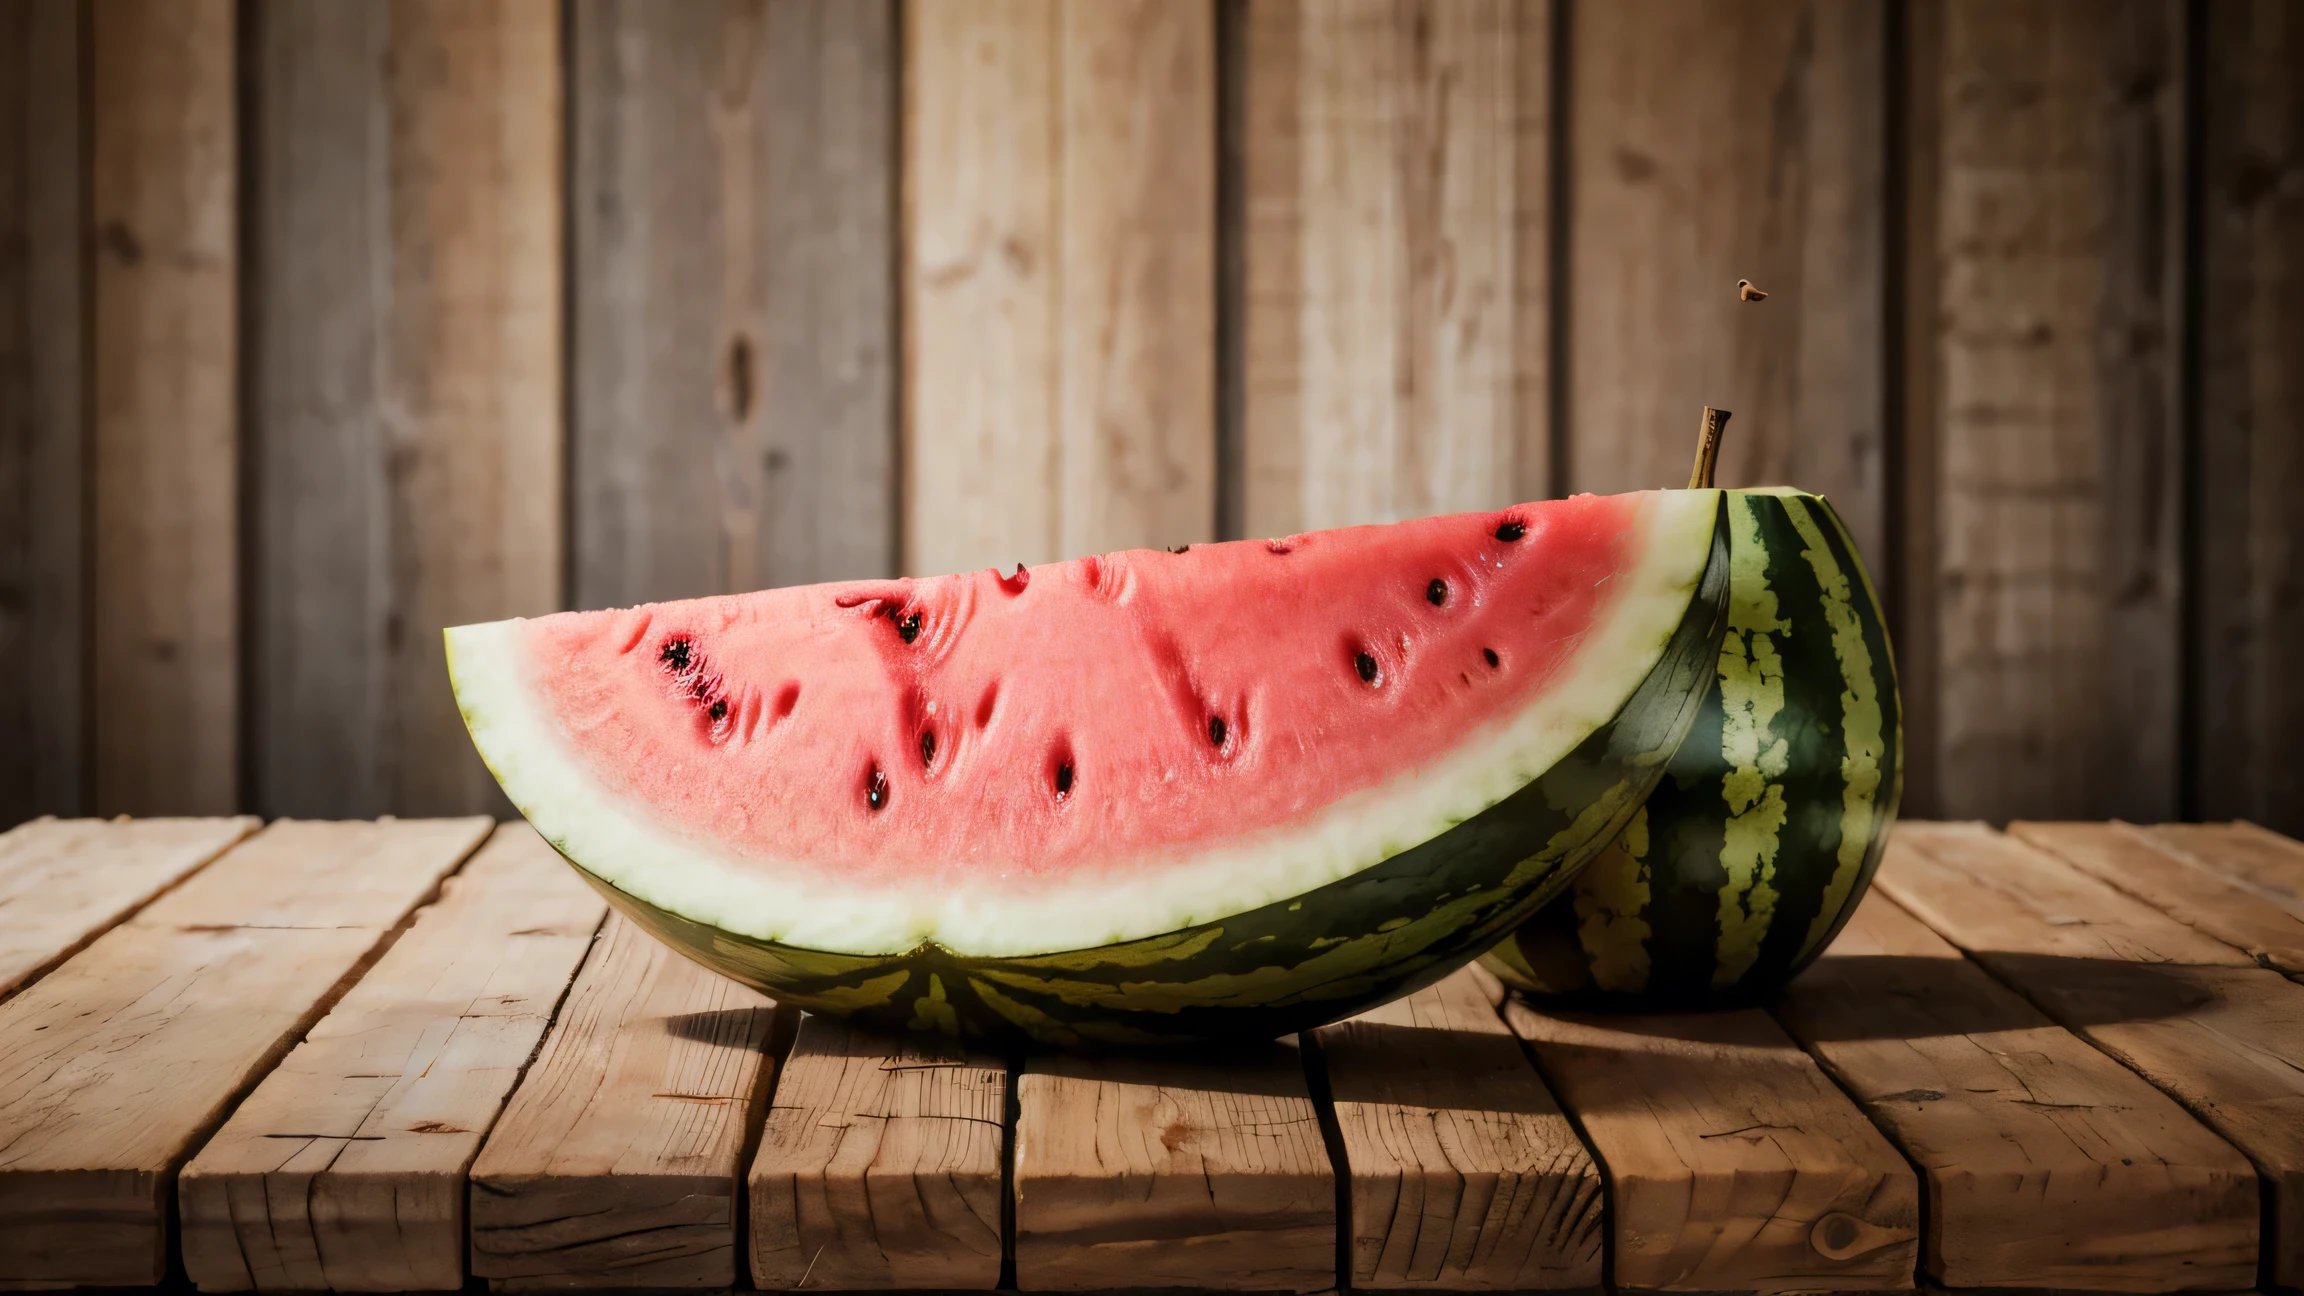 Watermelon on wooden table with green background. A refreshing summer treat on a rustic surface.

watermelon, fruit, food, no_humans, food_focus, blurry, realistic, still_life, blurry_background, depth_of_field